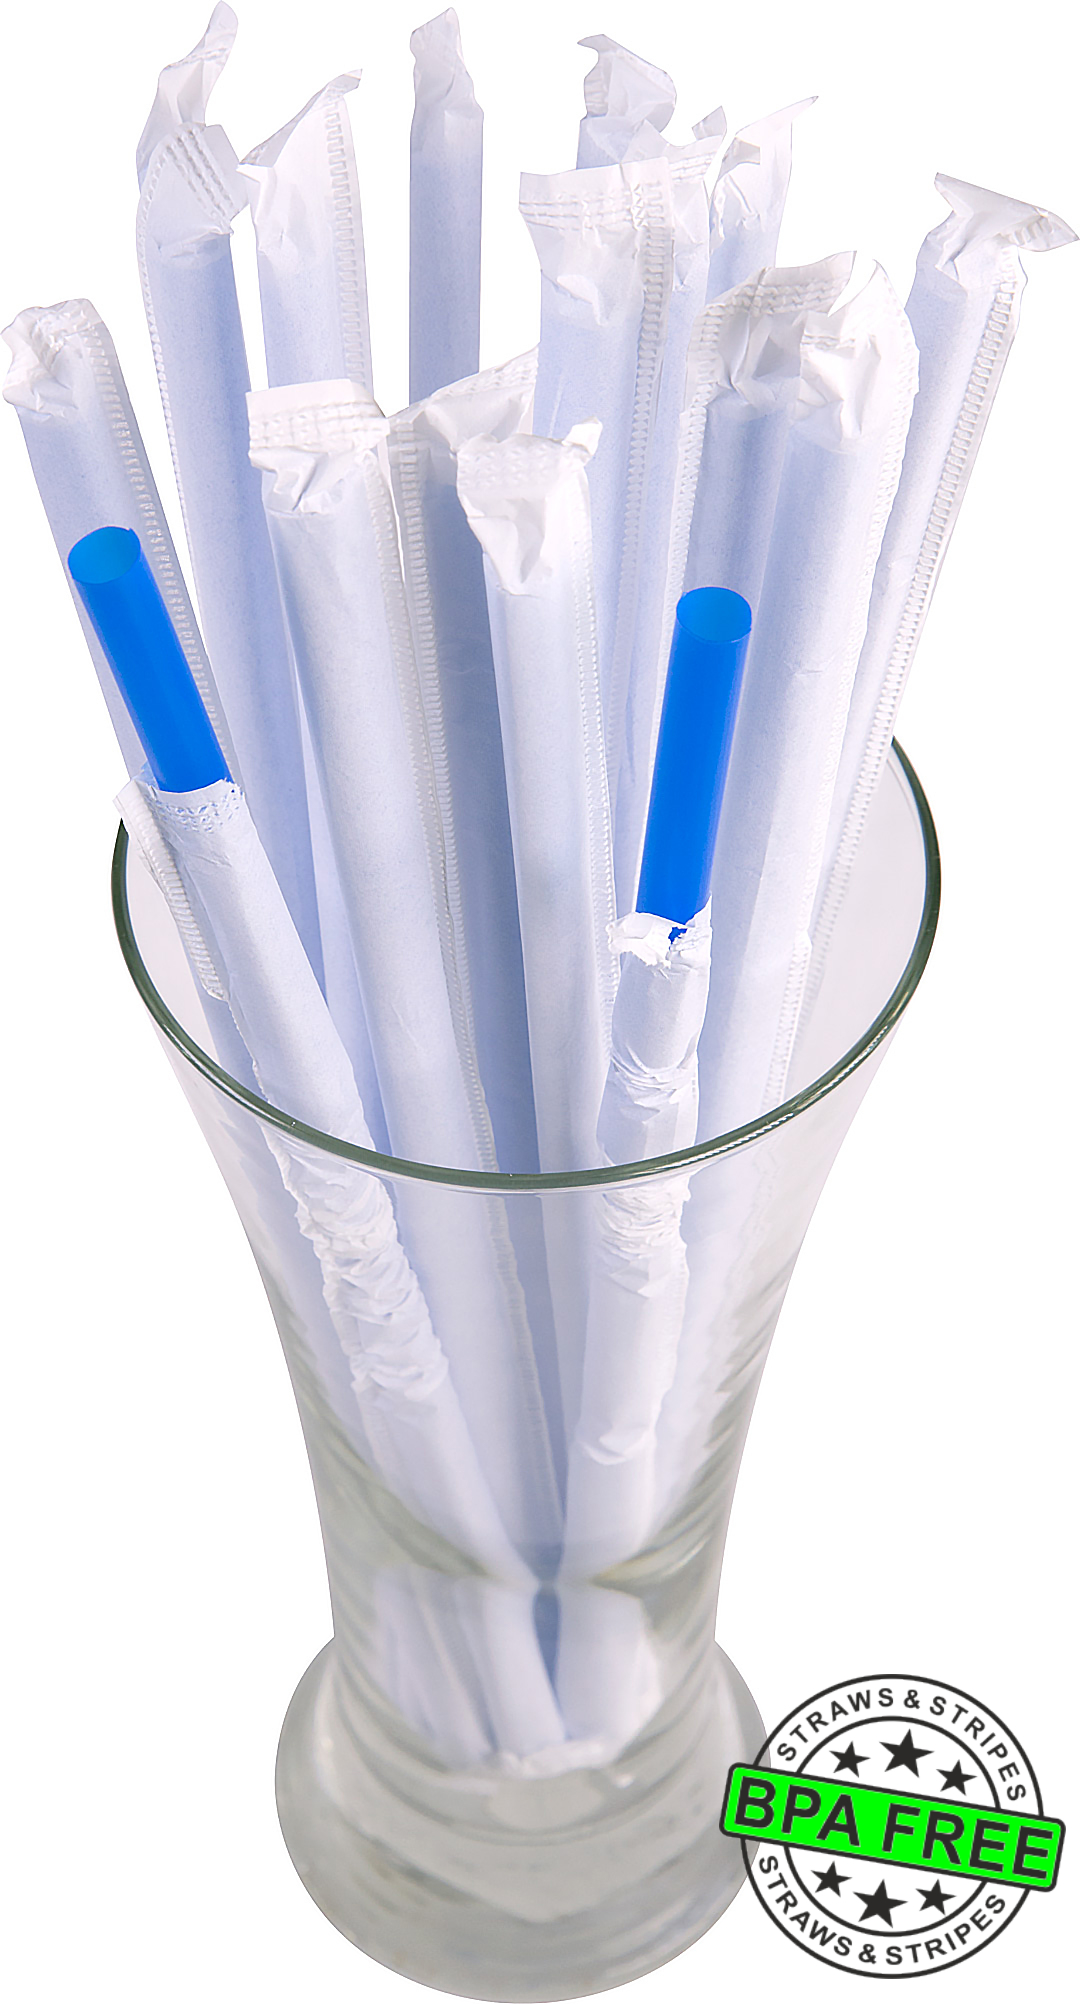 1 CASE - 2,500 (10x250) PAPER WRAPPED SMOOTHIE drinking straws 10 x 0.28 inch - color: blue